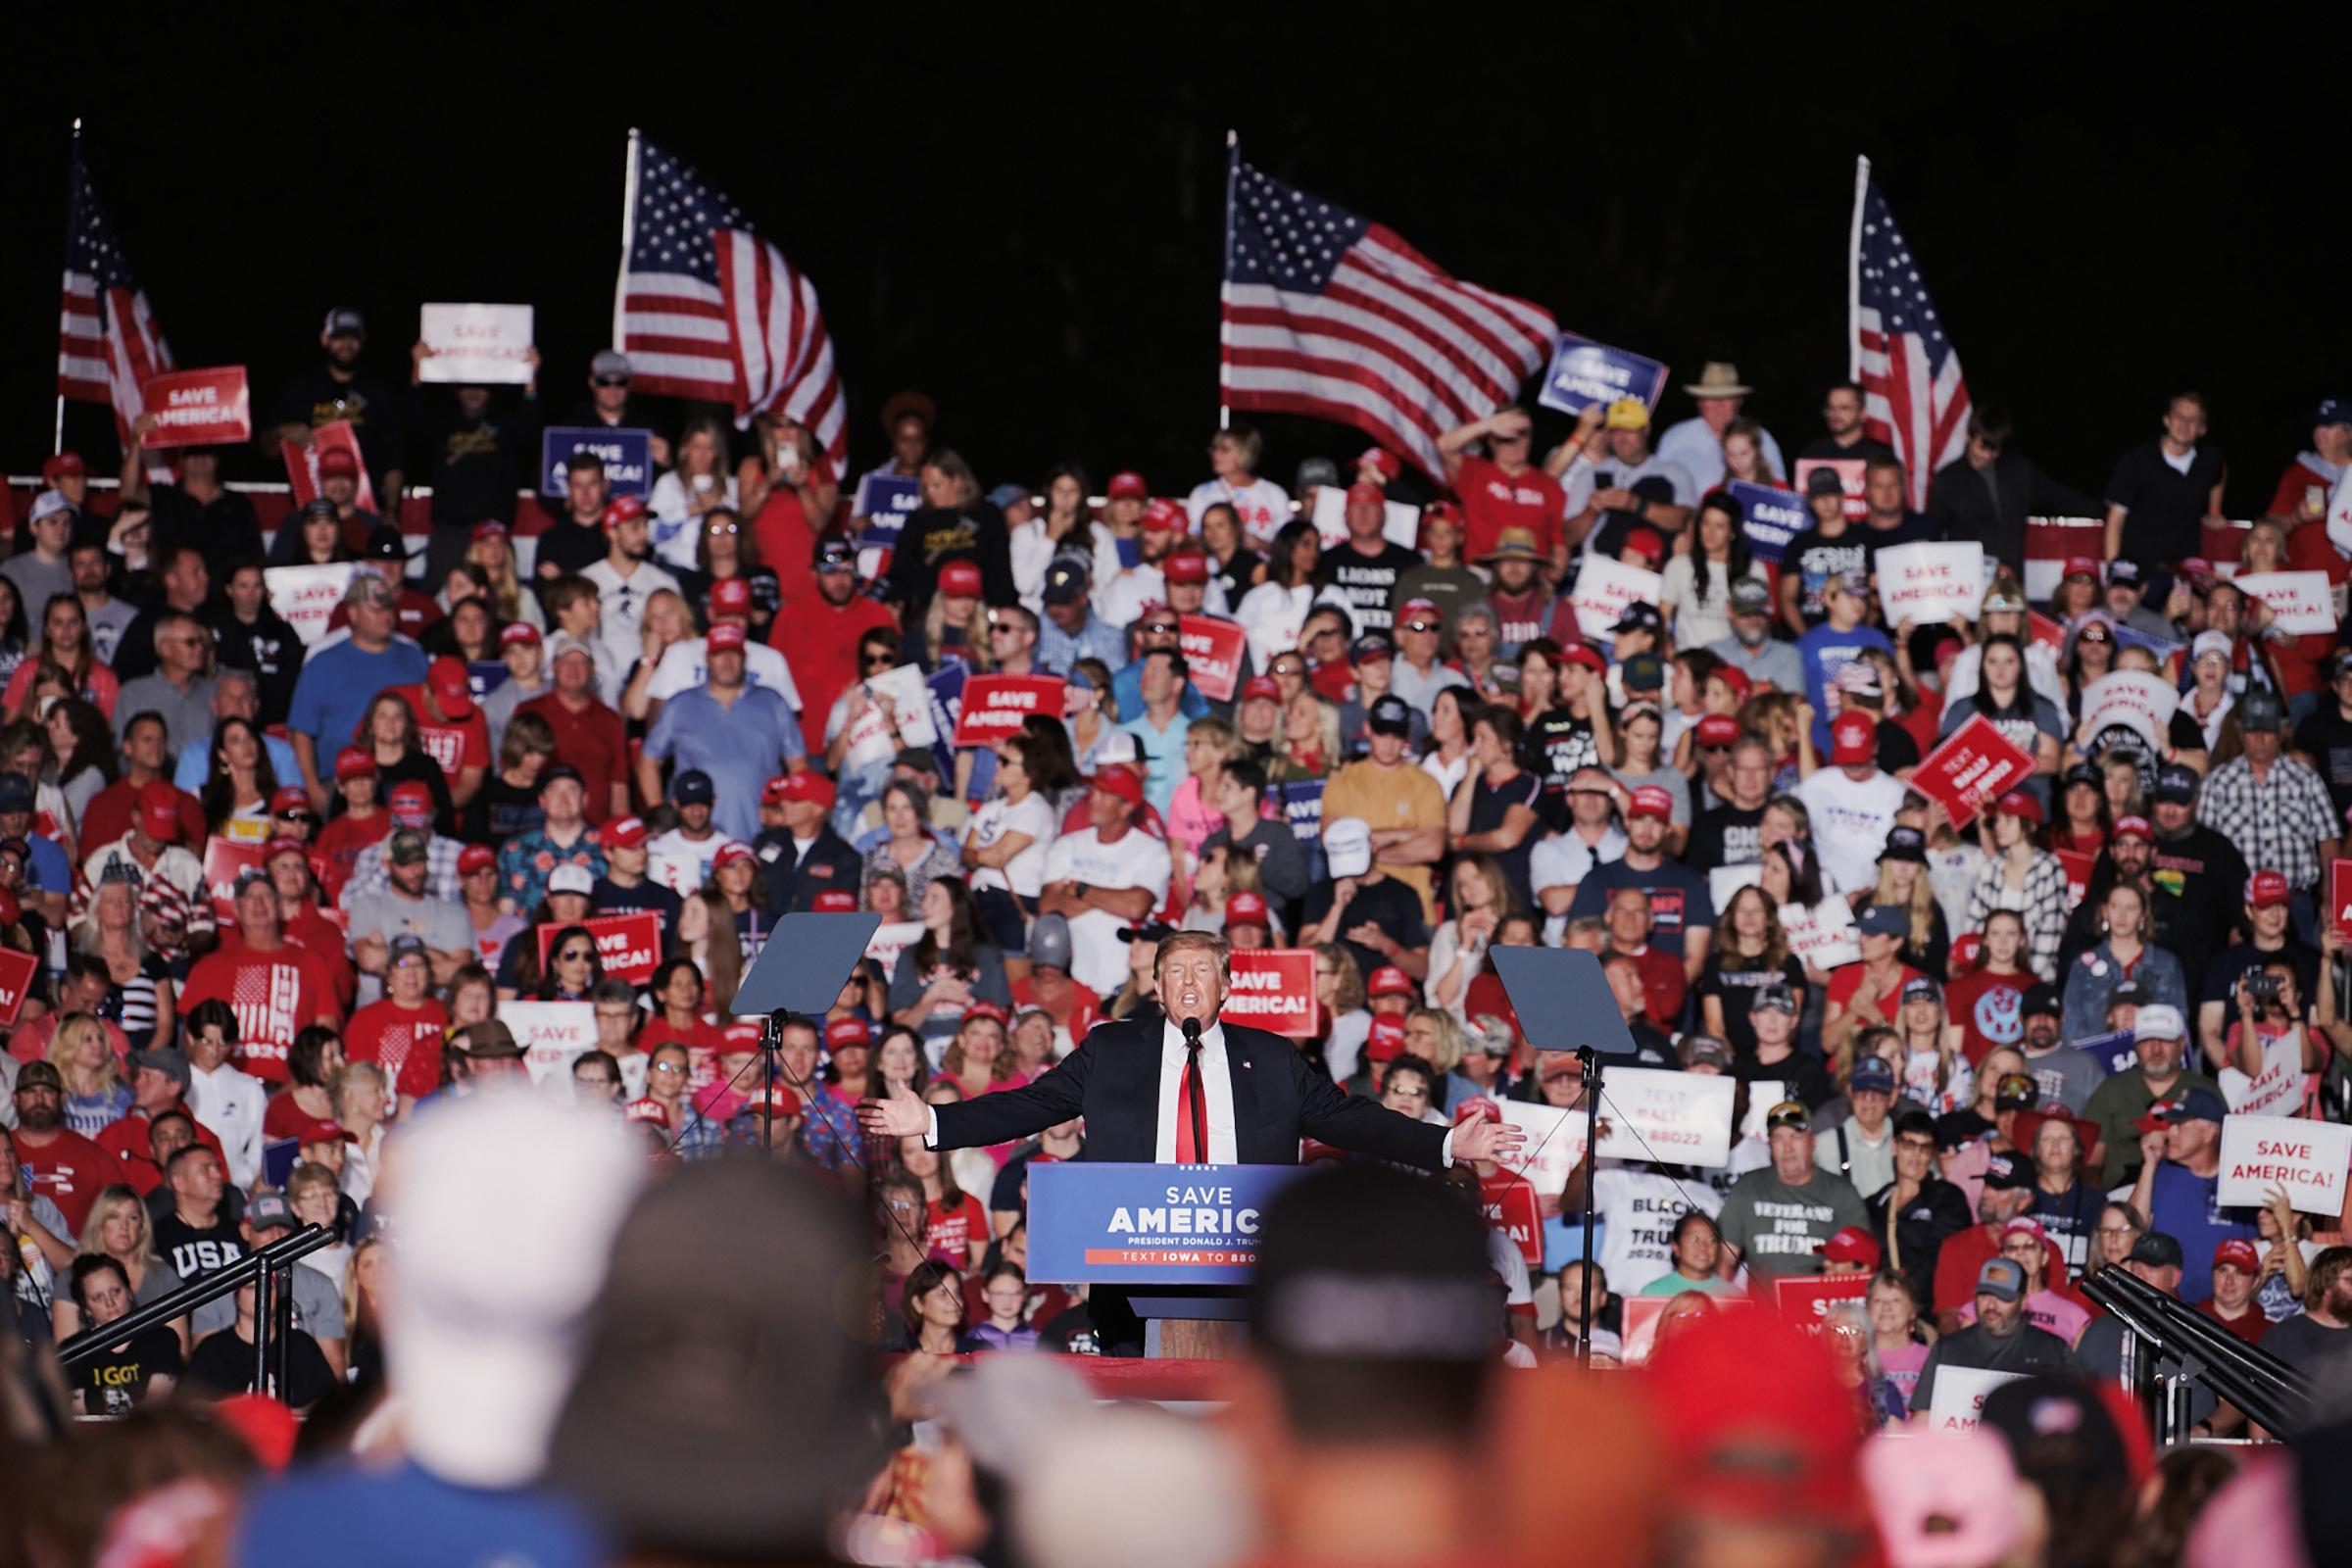 Former U.S. President Donald Trump speaks during a Save America rally at the Iowa State Fairgrounds in Des Moines, Iowa, U.S., on Saturday, Oct. 9, 2021. Trump has been hinting about another presidential bid, even as he has tried to steer clear of activities that would trigger federal election laws that would require him to register as a candidate -- and limit spending. (Dan Brouillette—Bloomberg/Getty Images)